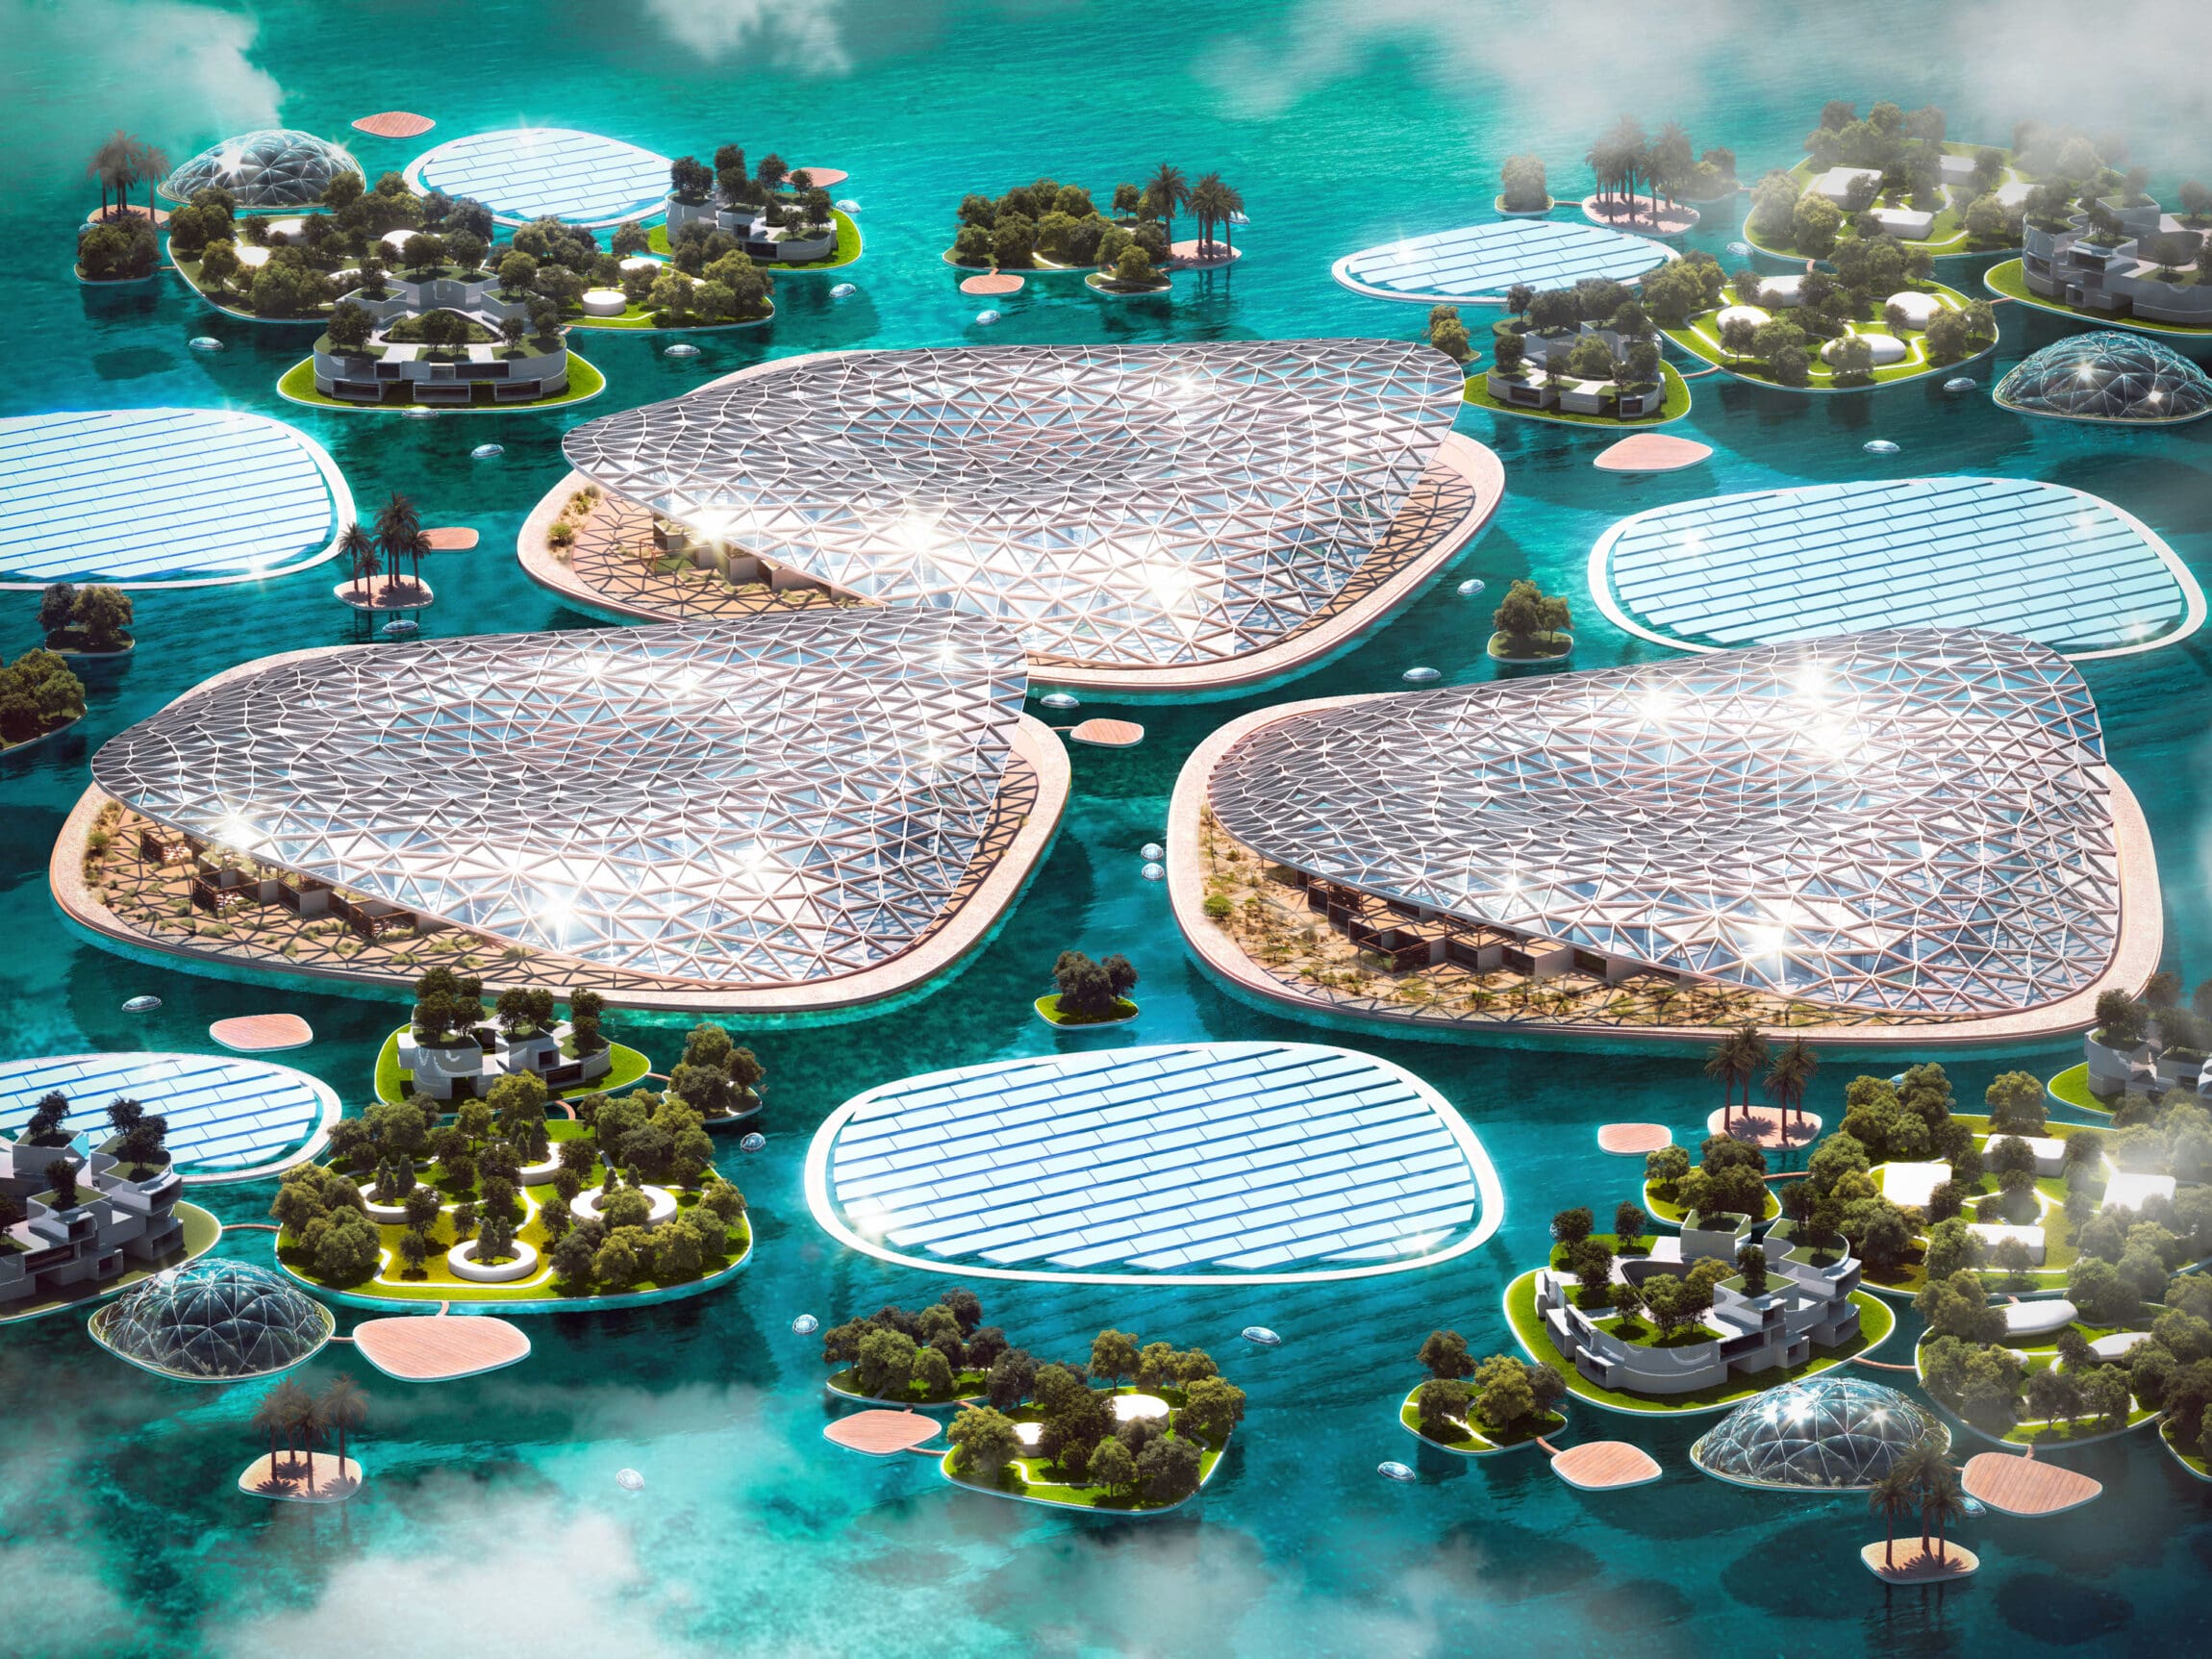 The Dubai Reef project, a sustainable floating community for marine research by net-zero developer URB